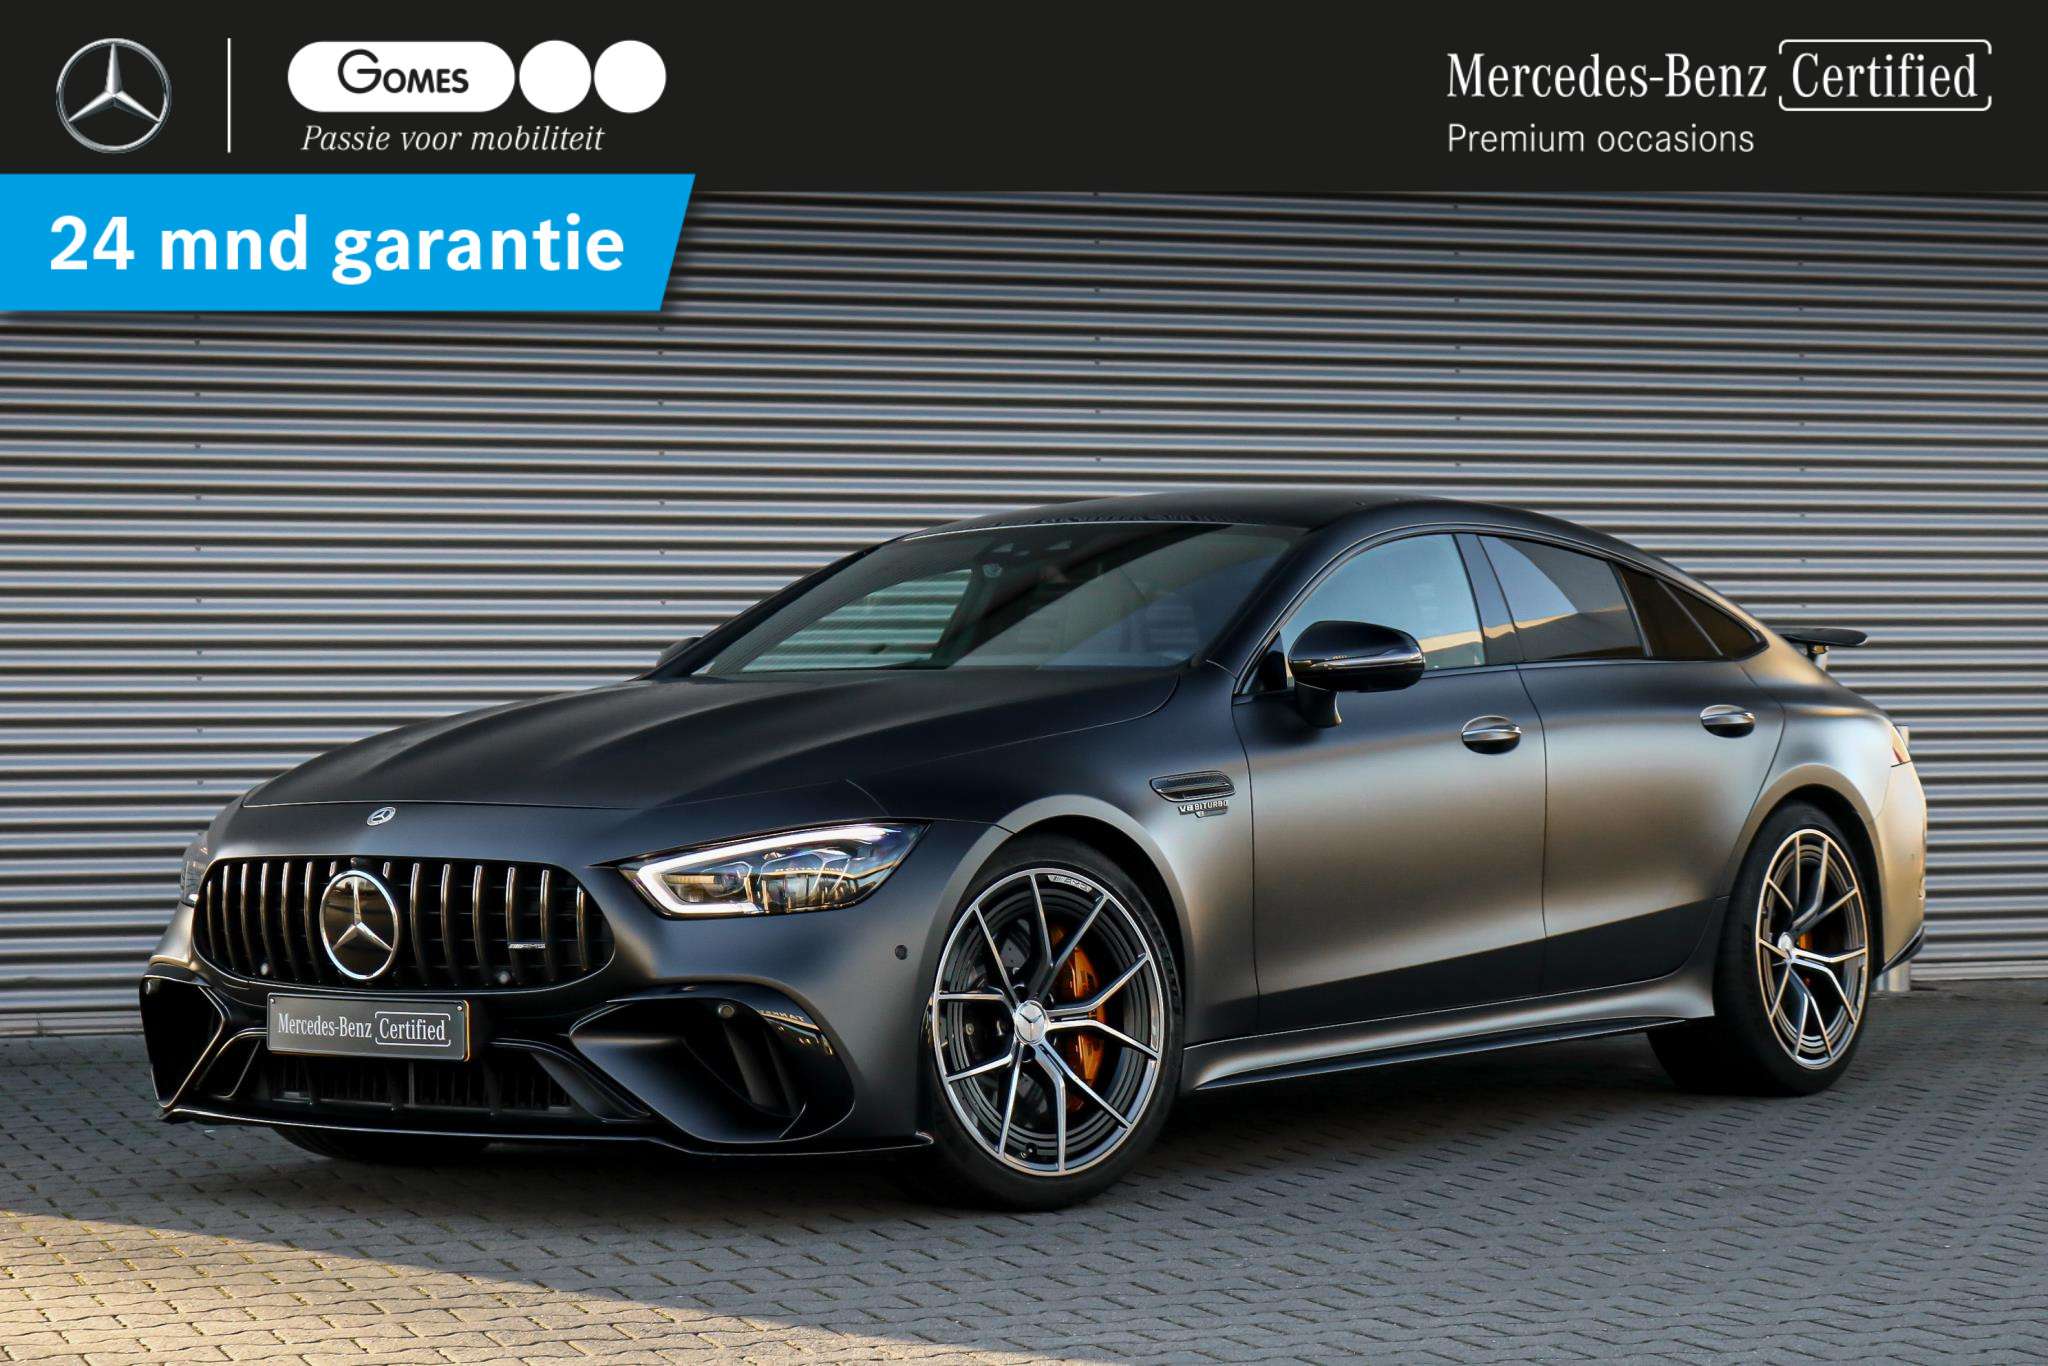 Mercedes-Benz AMG GT Compact in Grey used in AALSMEER for € 229,950.-